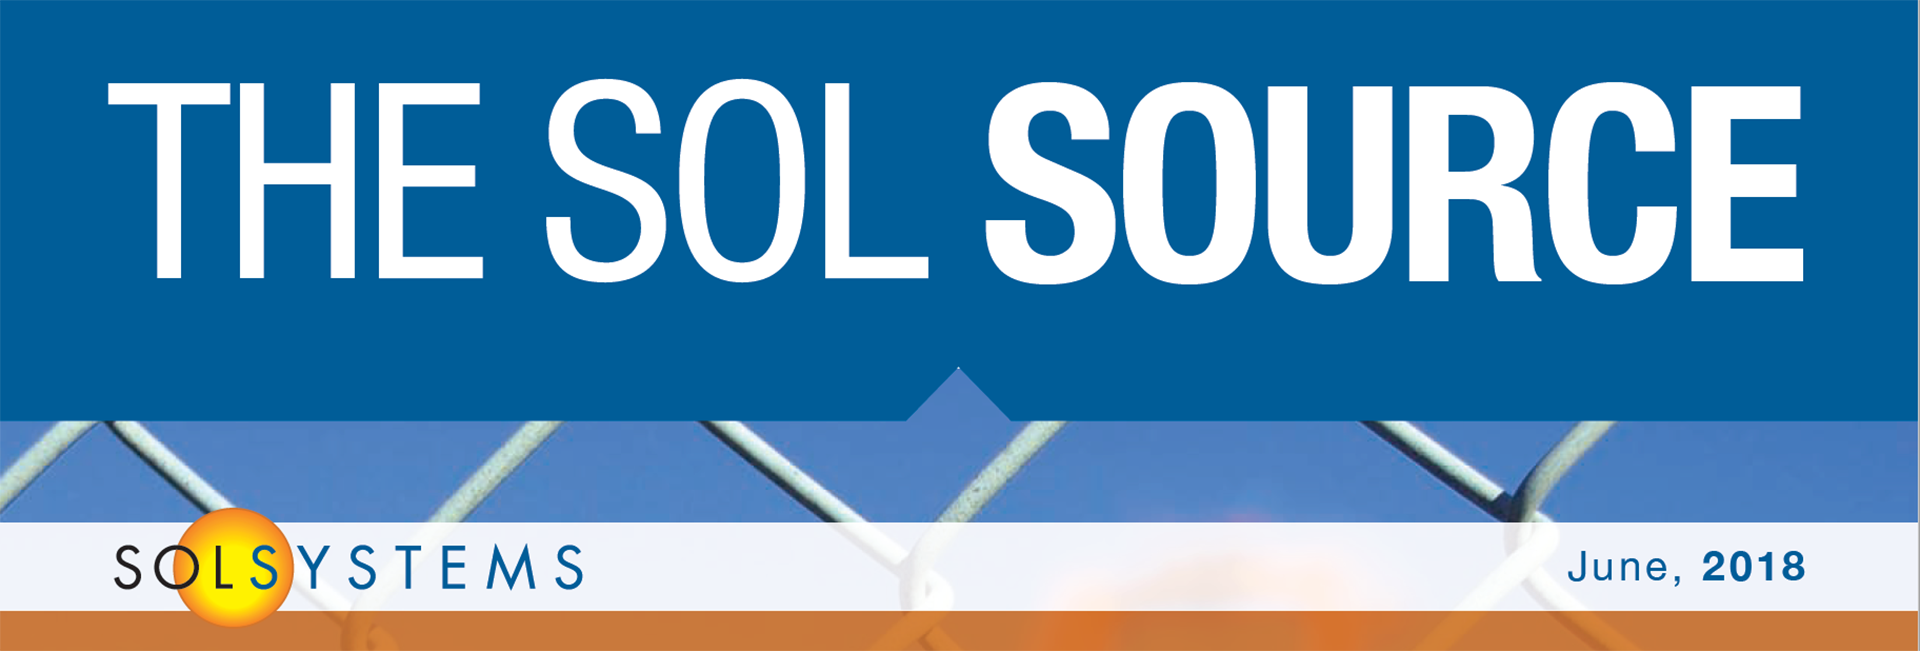 The Sol SOURCE: June 2018